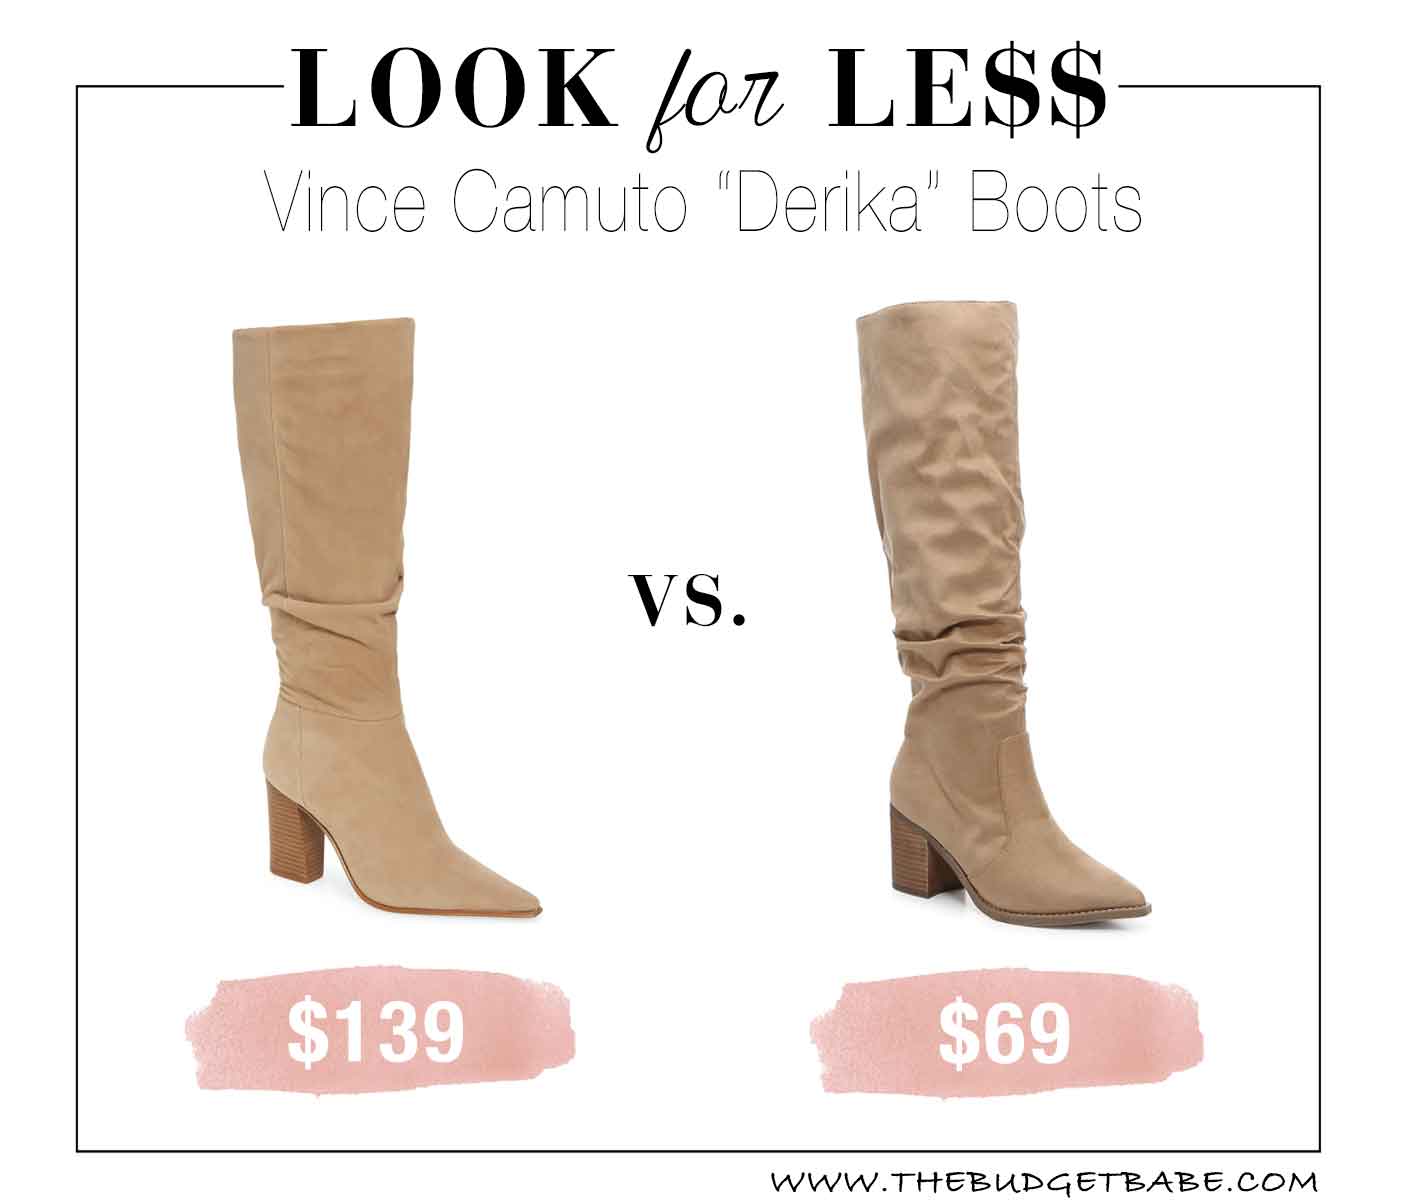 Wow this looks just like the Derika boots for half the price!